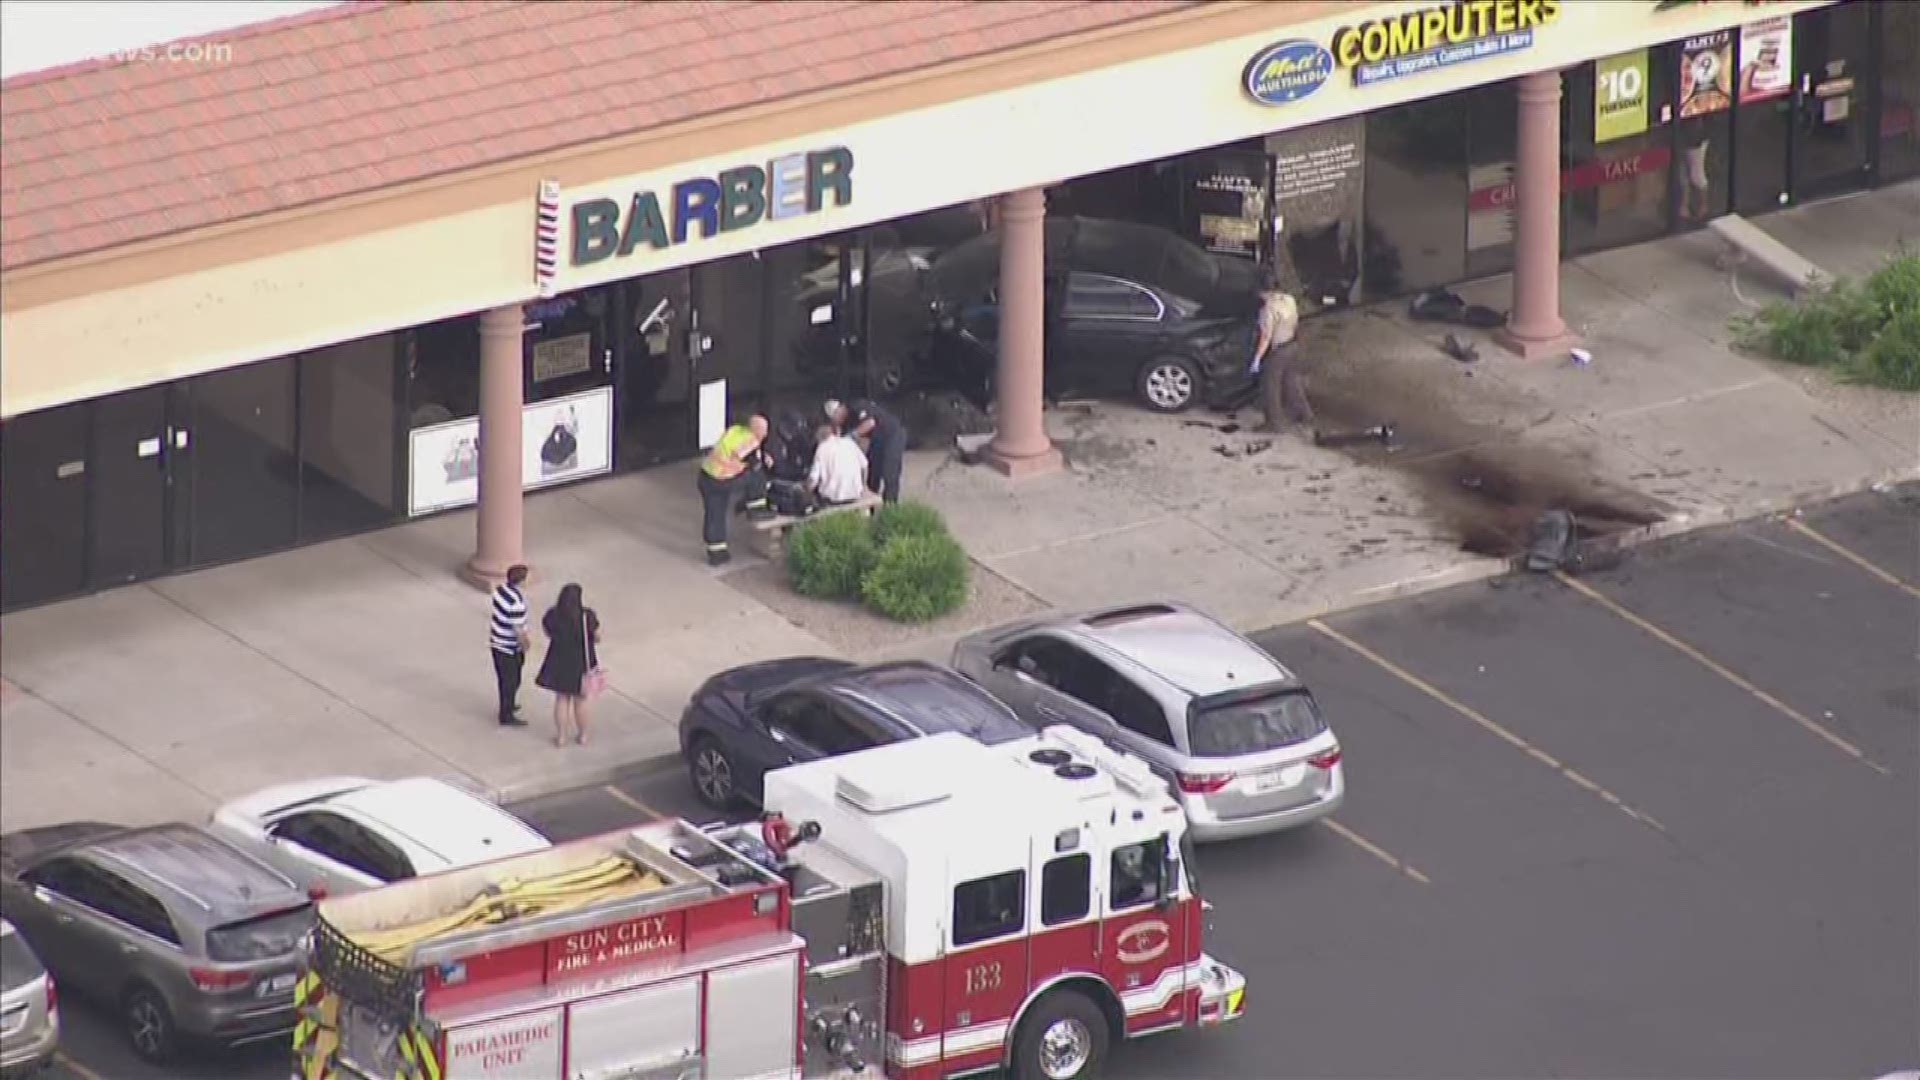 A black sedan went through the front of a barber shop and a computer store near 107th Ave. and Grand Ave. in Sun City. It appears the sedan was involved in a crash with another sedan before crashing into the building.